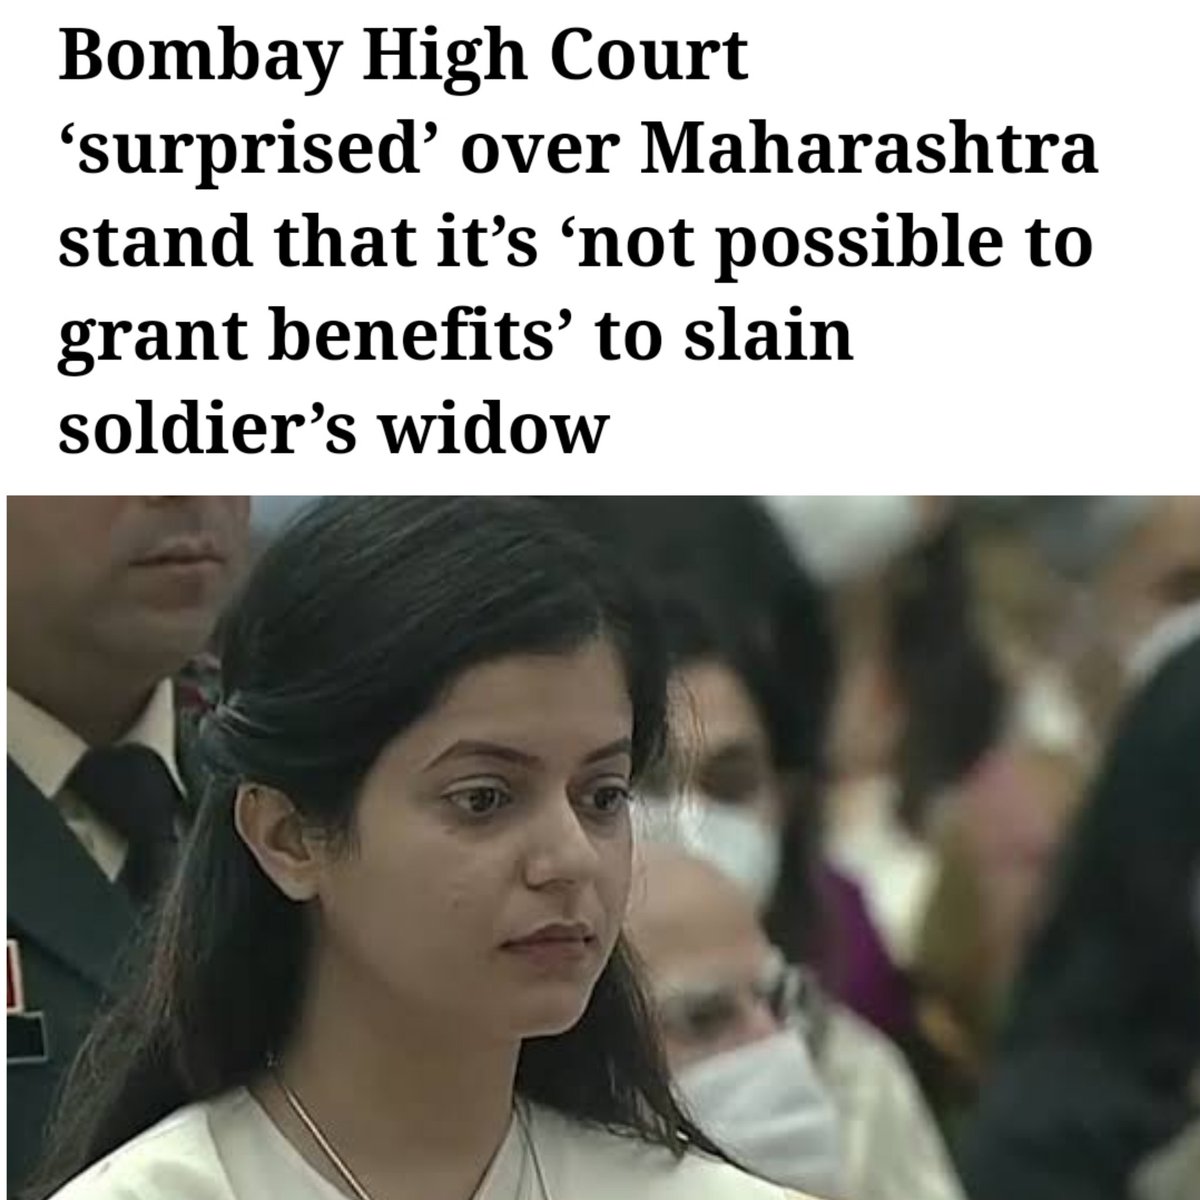 MH gov said it could not decide on the matter as a special case under prevailing circumstances. 🤔 Whn a politician get benefit for no spcial duty thn why MH gov couldn't decide it #Maharastra #soldier